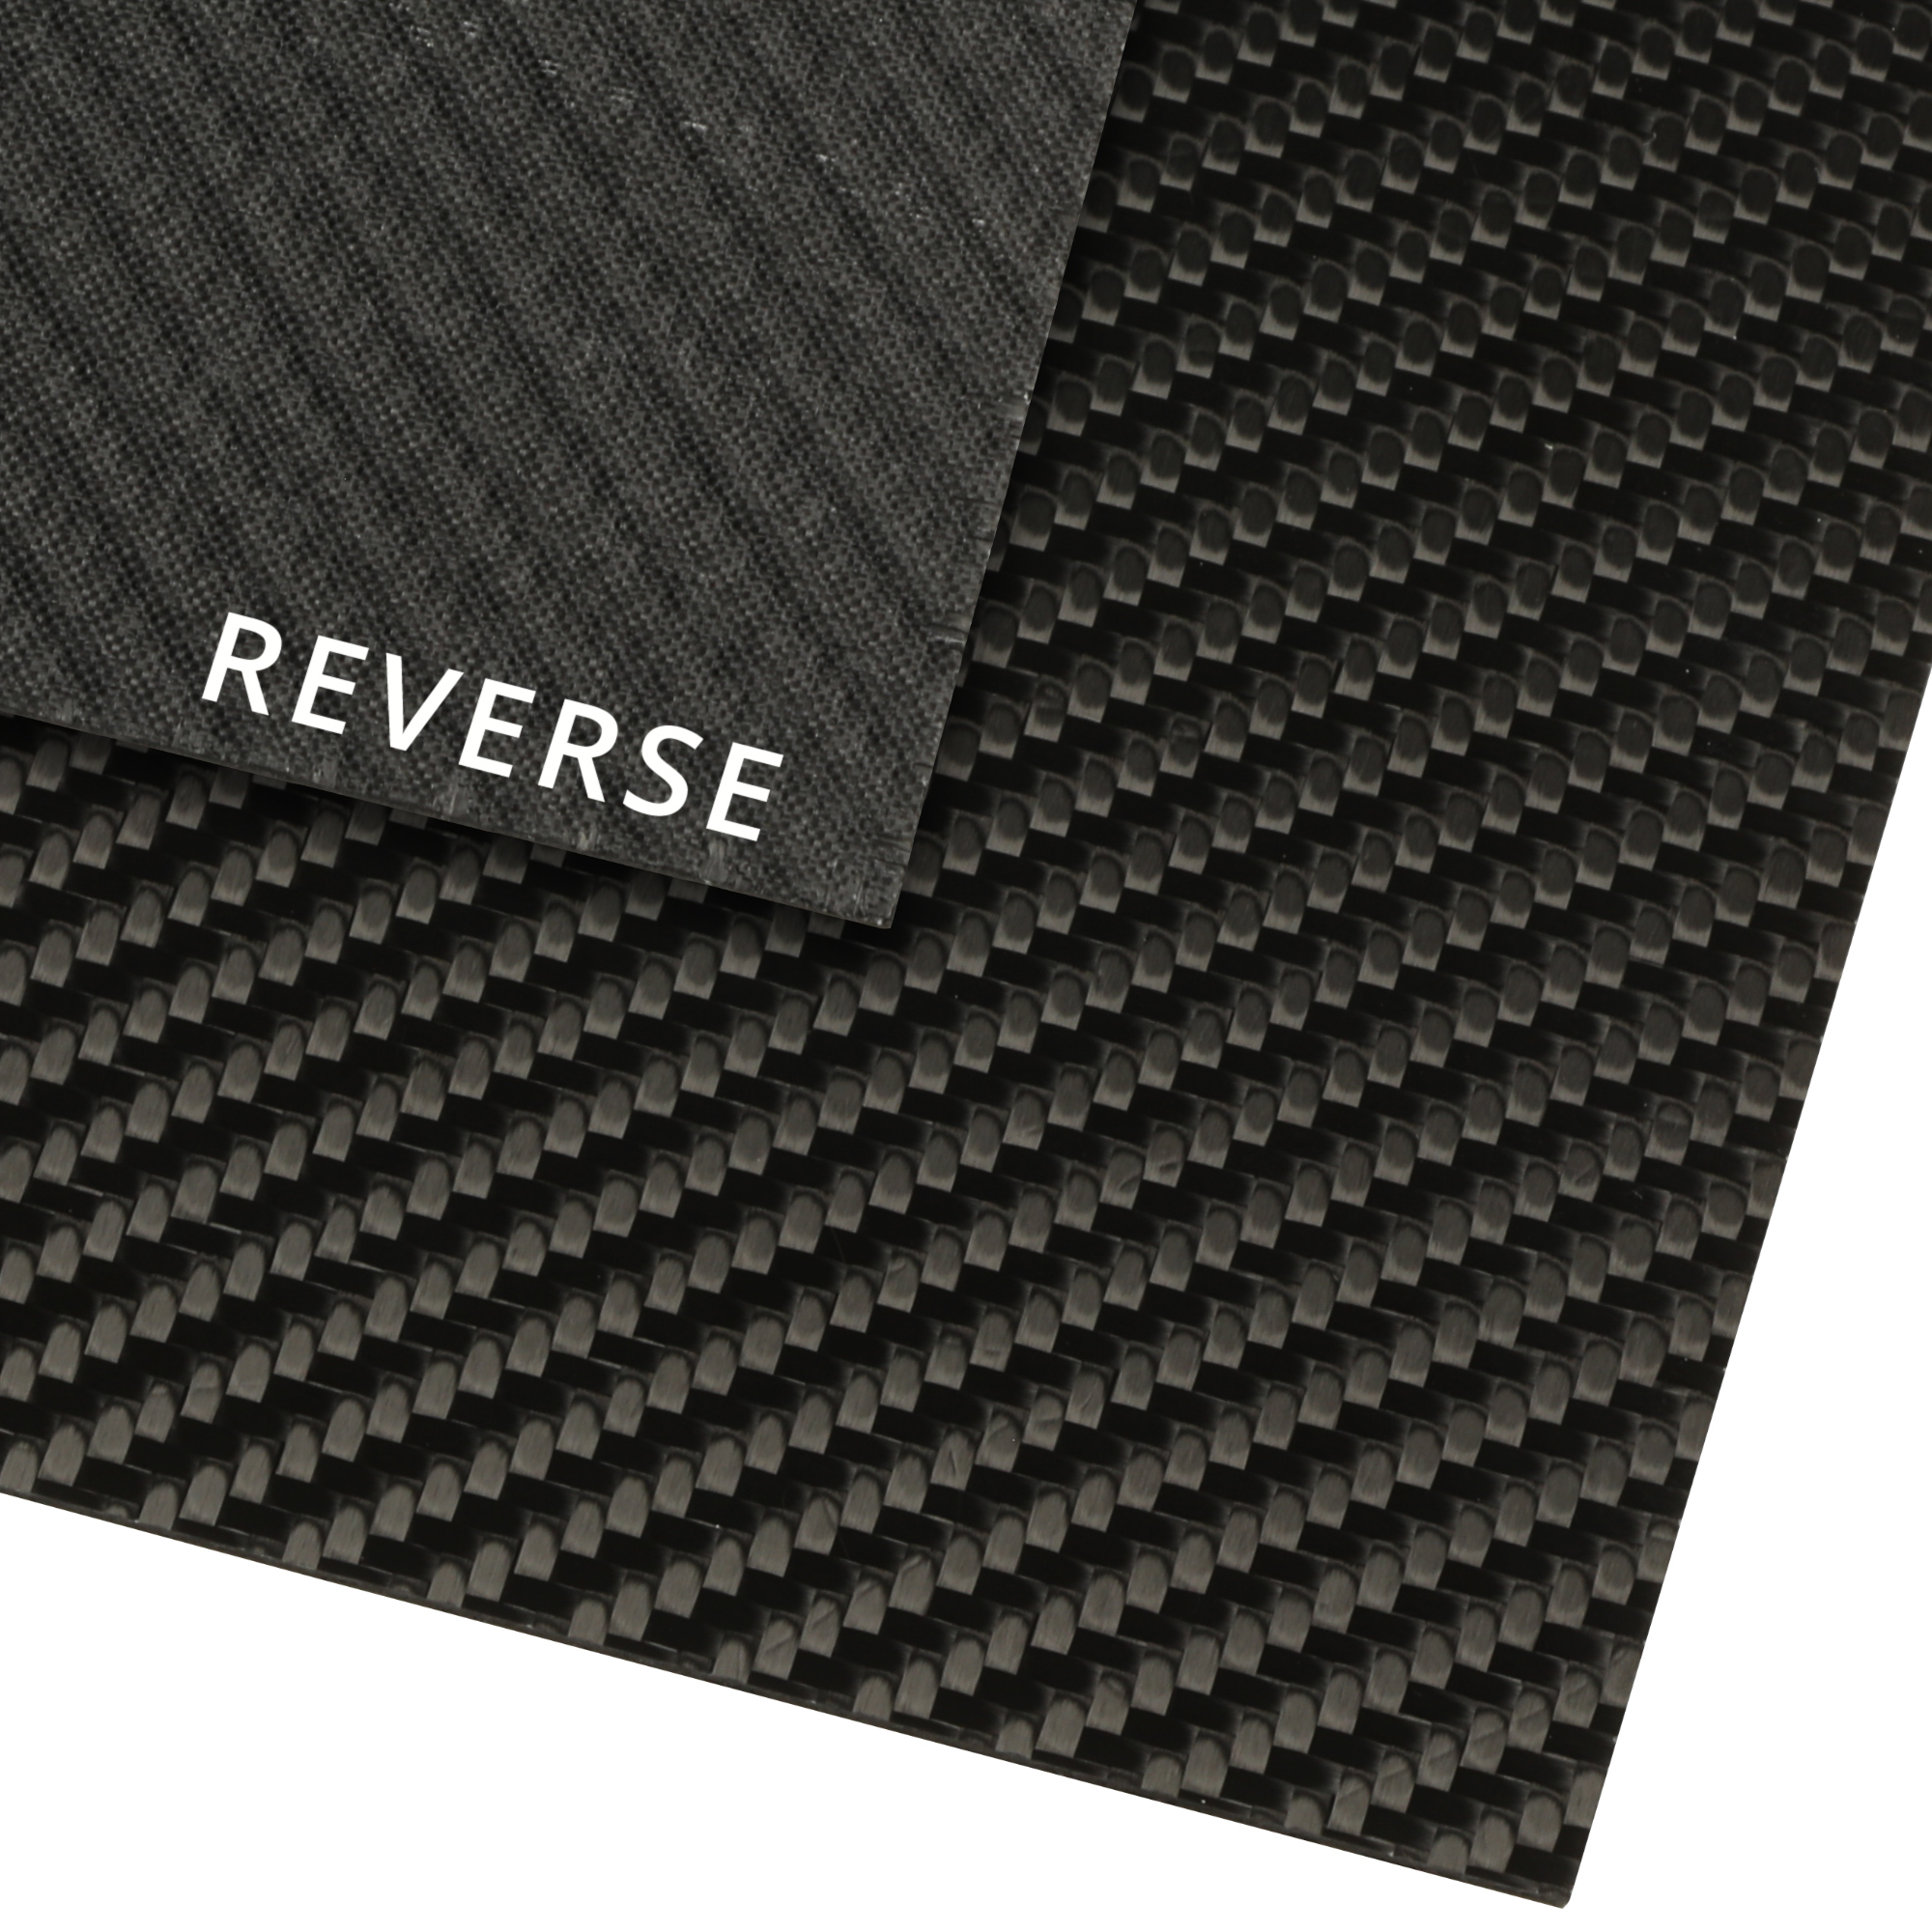 Glossy Surface ReliaBot 3K Full Carbon Fiber Sheet 200mm x 300mm x 2mm Plain Weave Panel Plate Thickness 2mm 